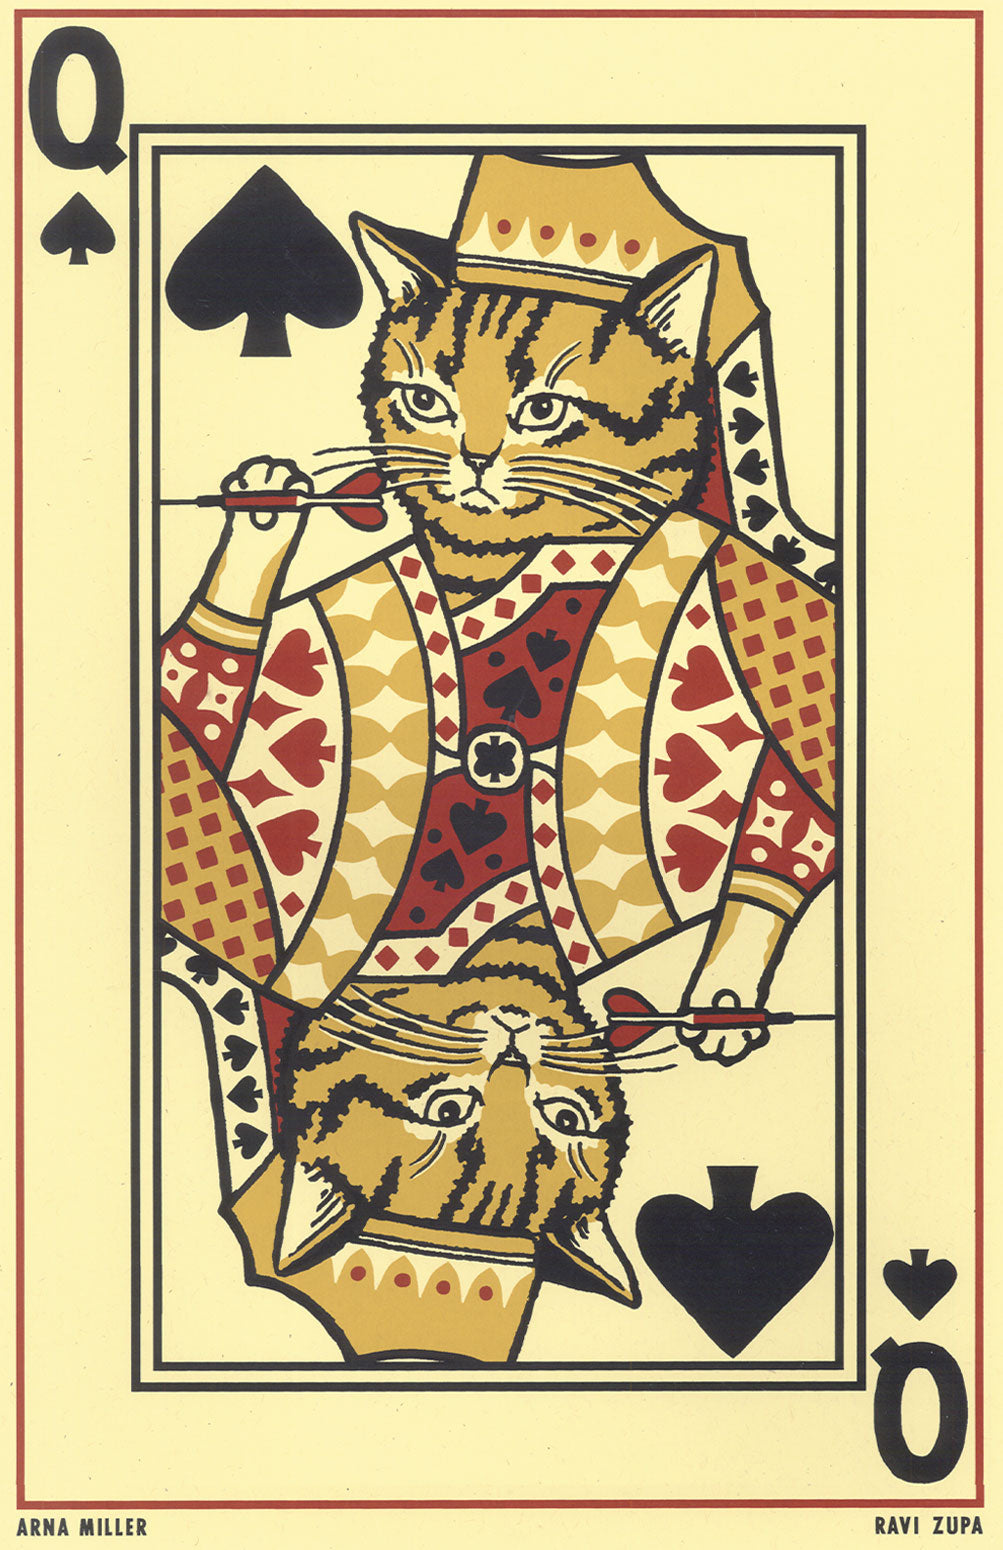 Drunk Cat Series Print - Queen of Spades - By Arna Miller and Ravi Zupa